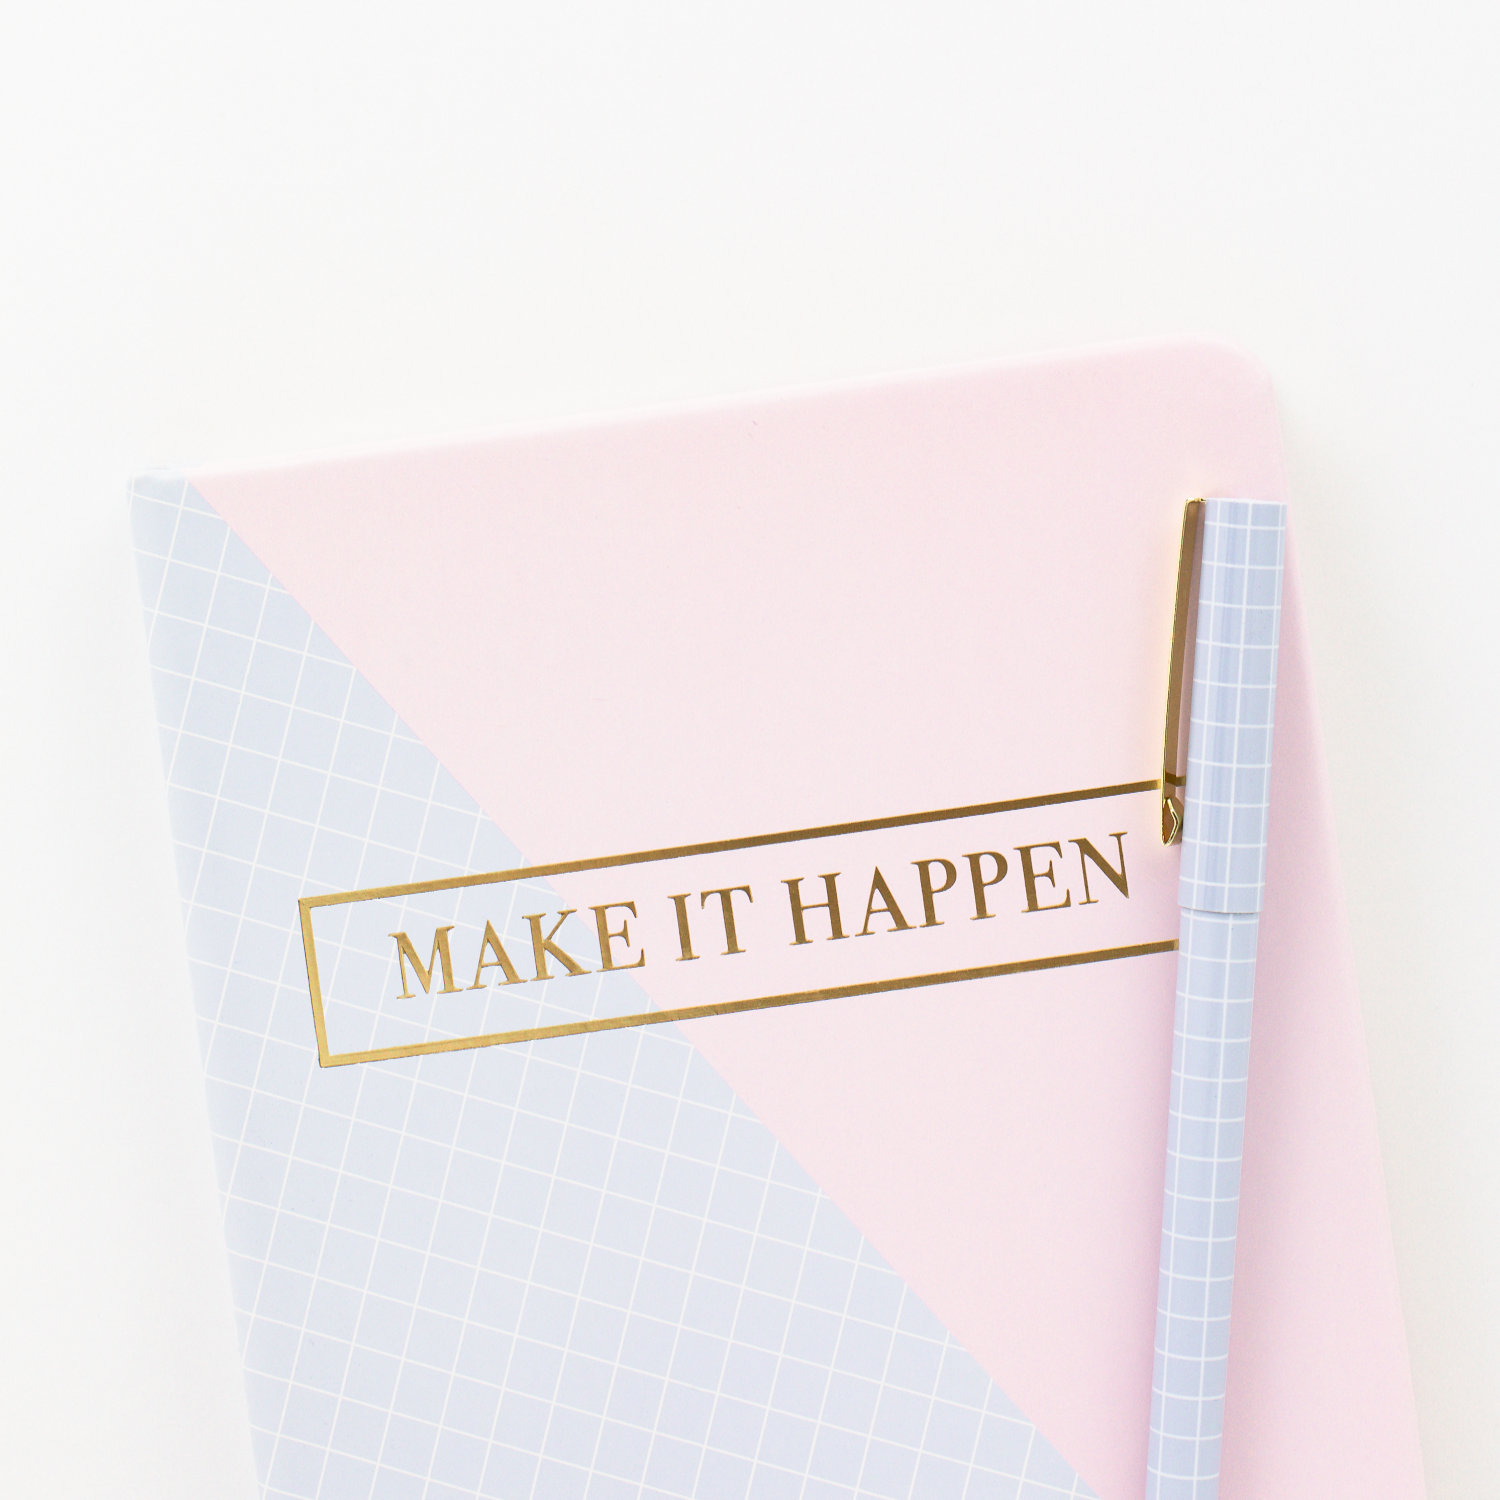 Pink and blue notebook with the words "Make it Happen" written on it and a blue dotted pen on top of it.